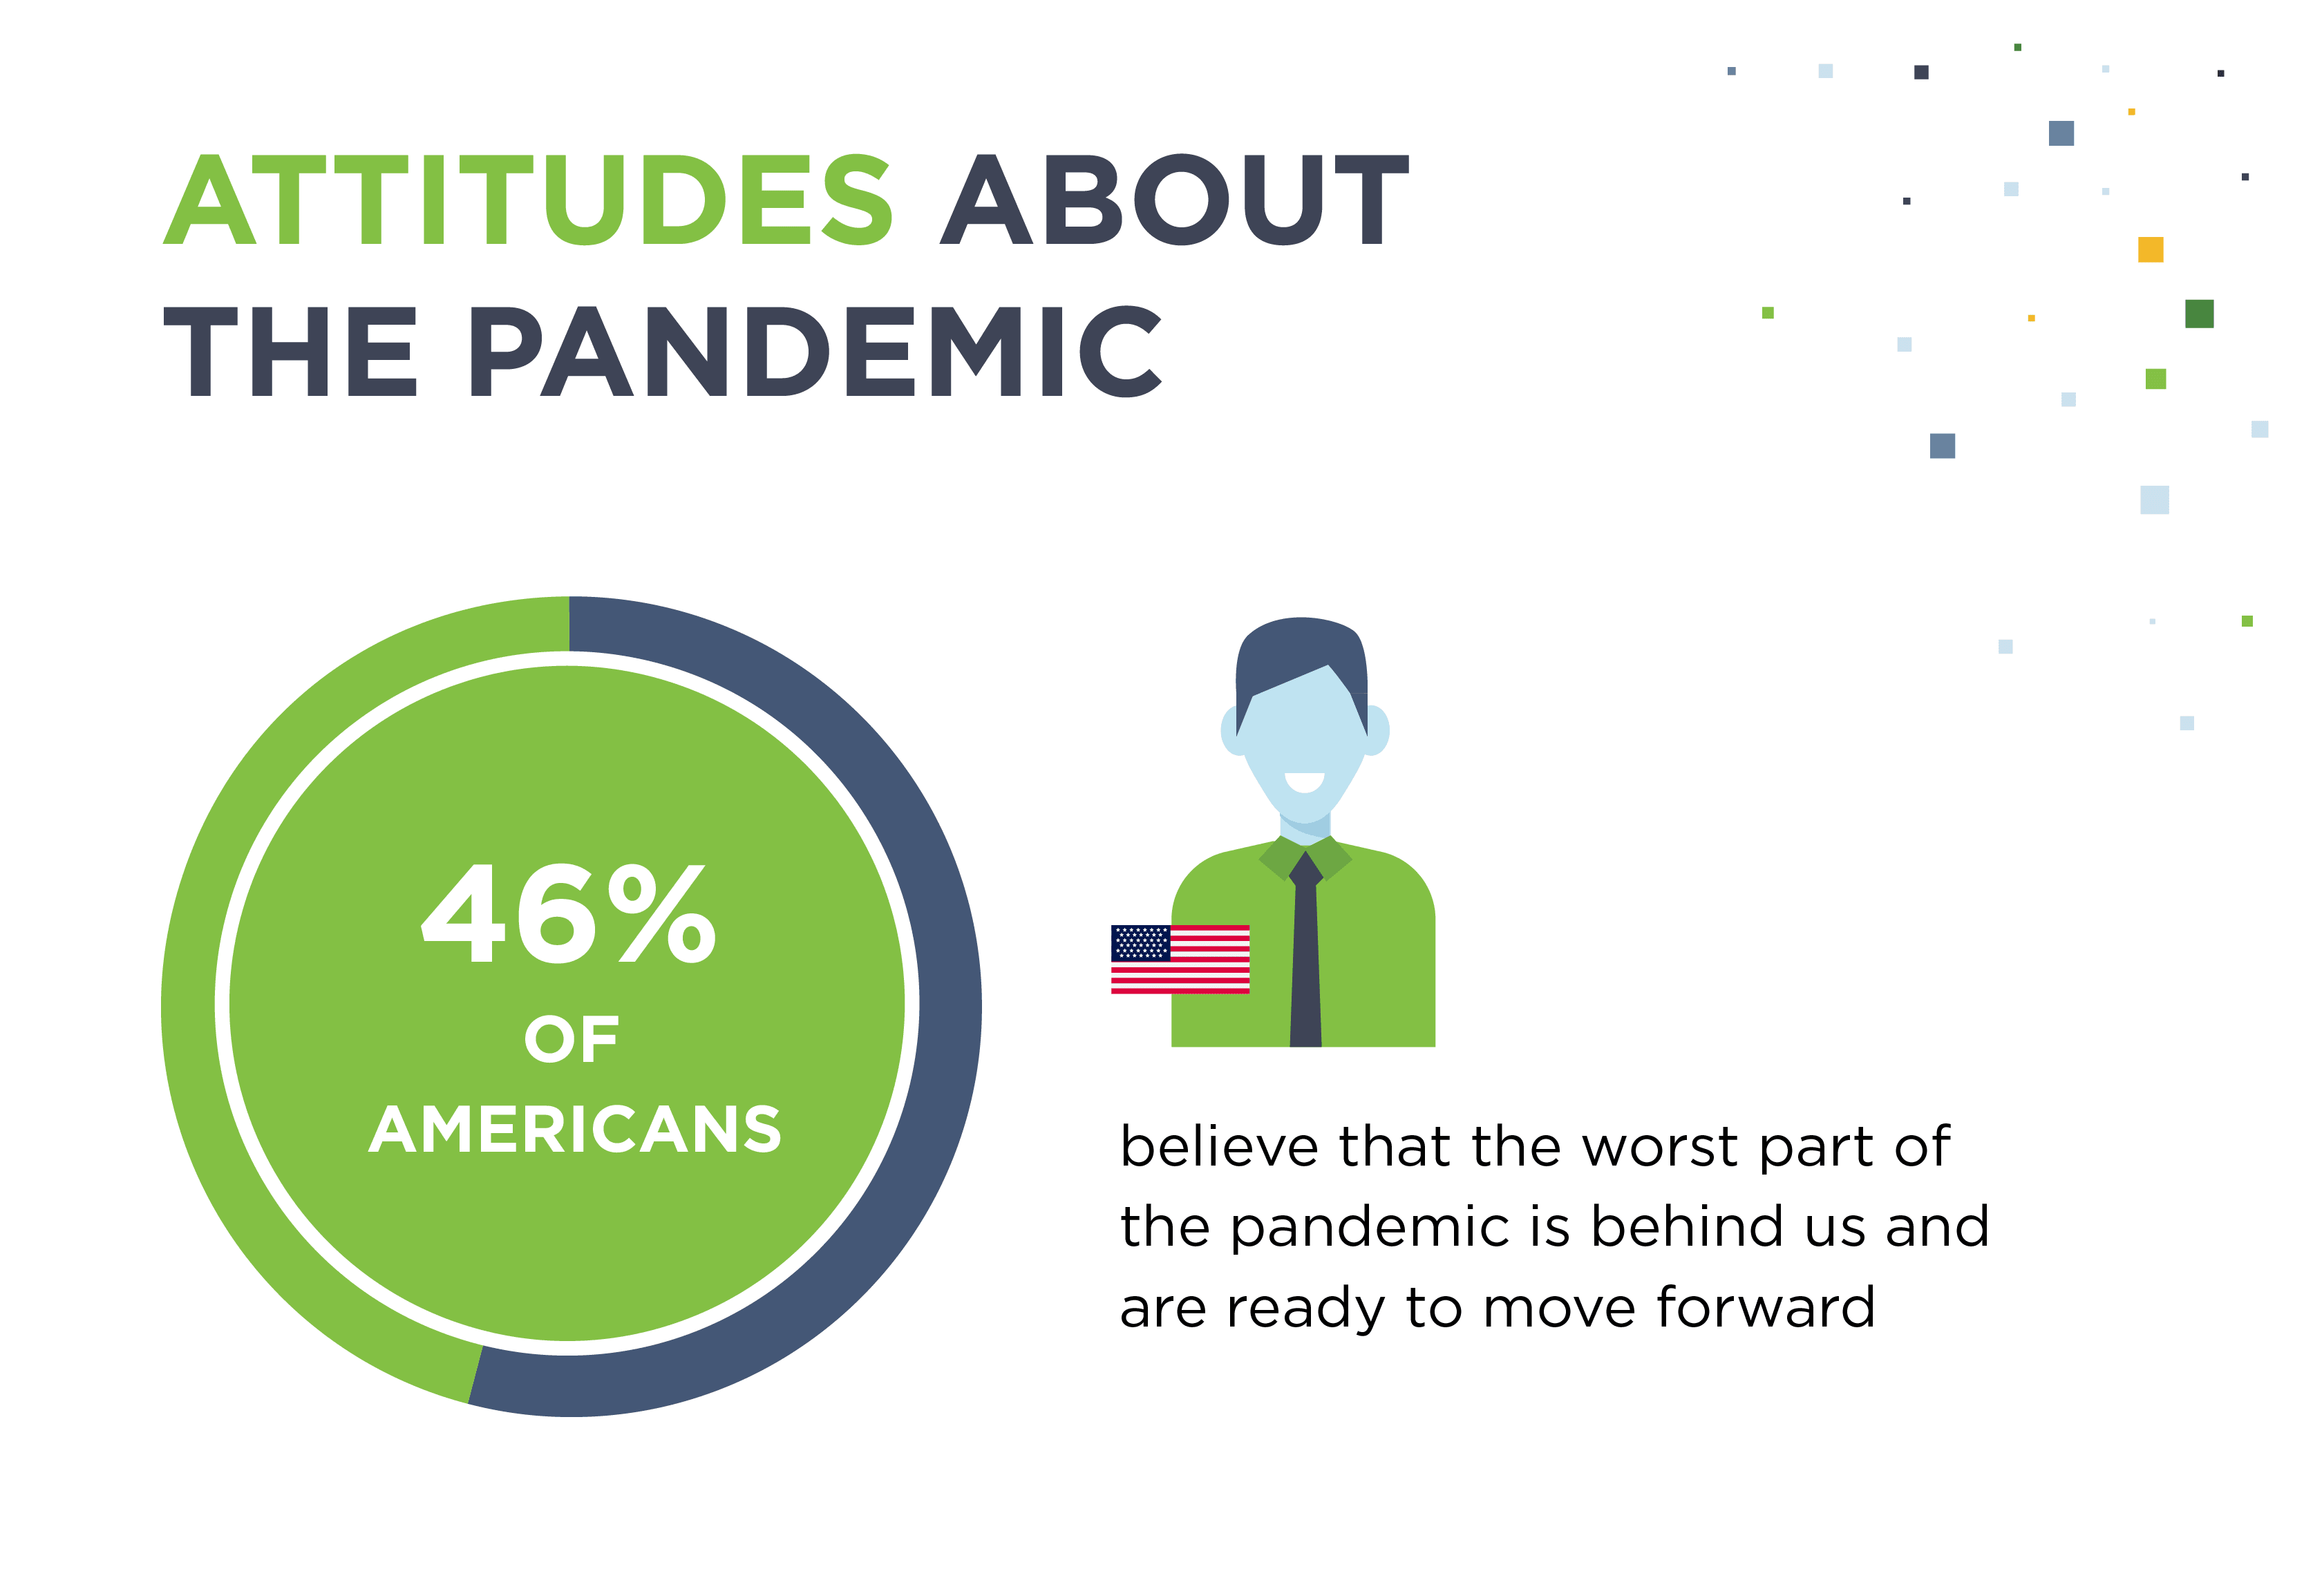 Survey shows 46% of Americans think worst of pandemic is behind us.